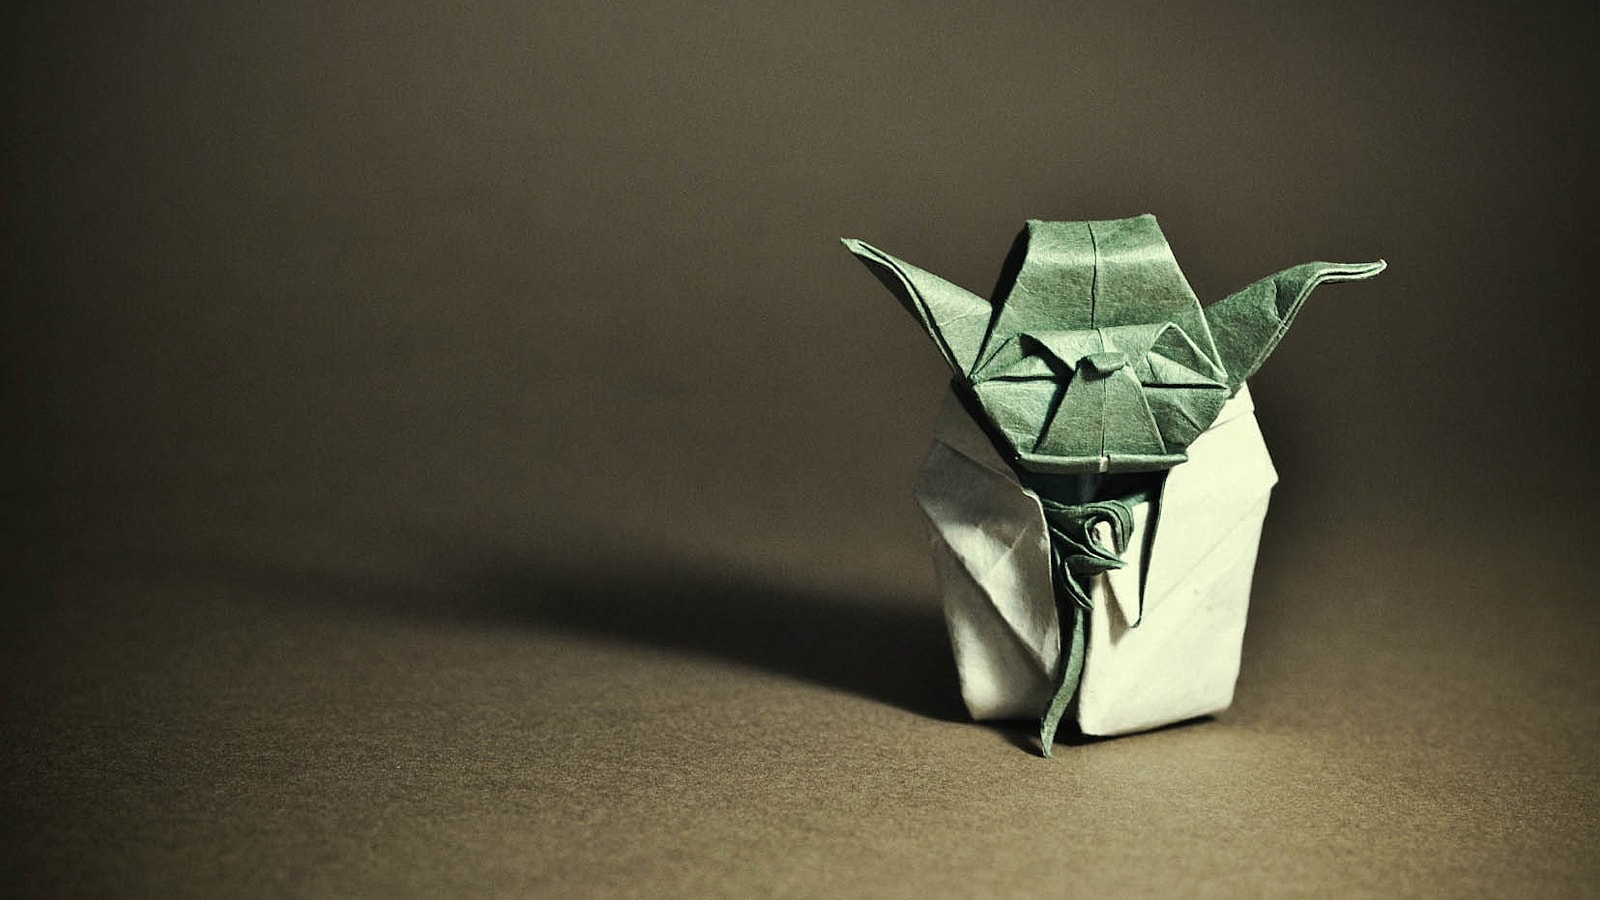 Origami Star Wars Characters Some Of My Favourite Star Wars Origami To Celebrate Star Wars Day